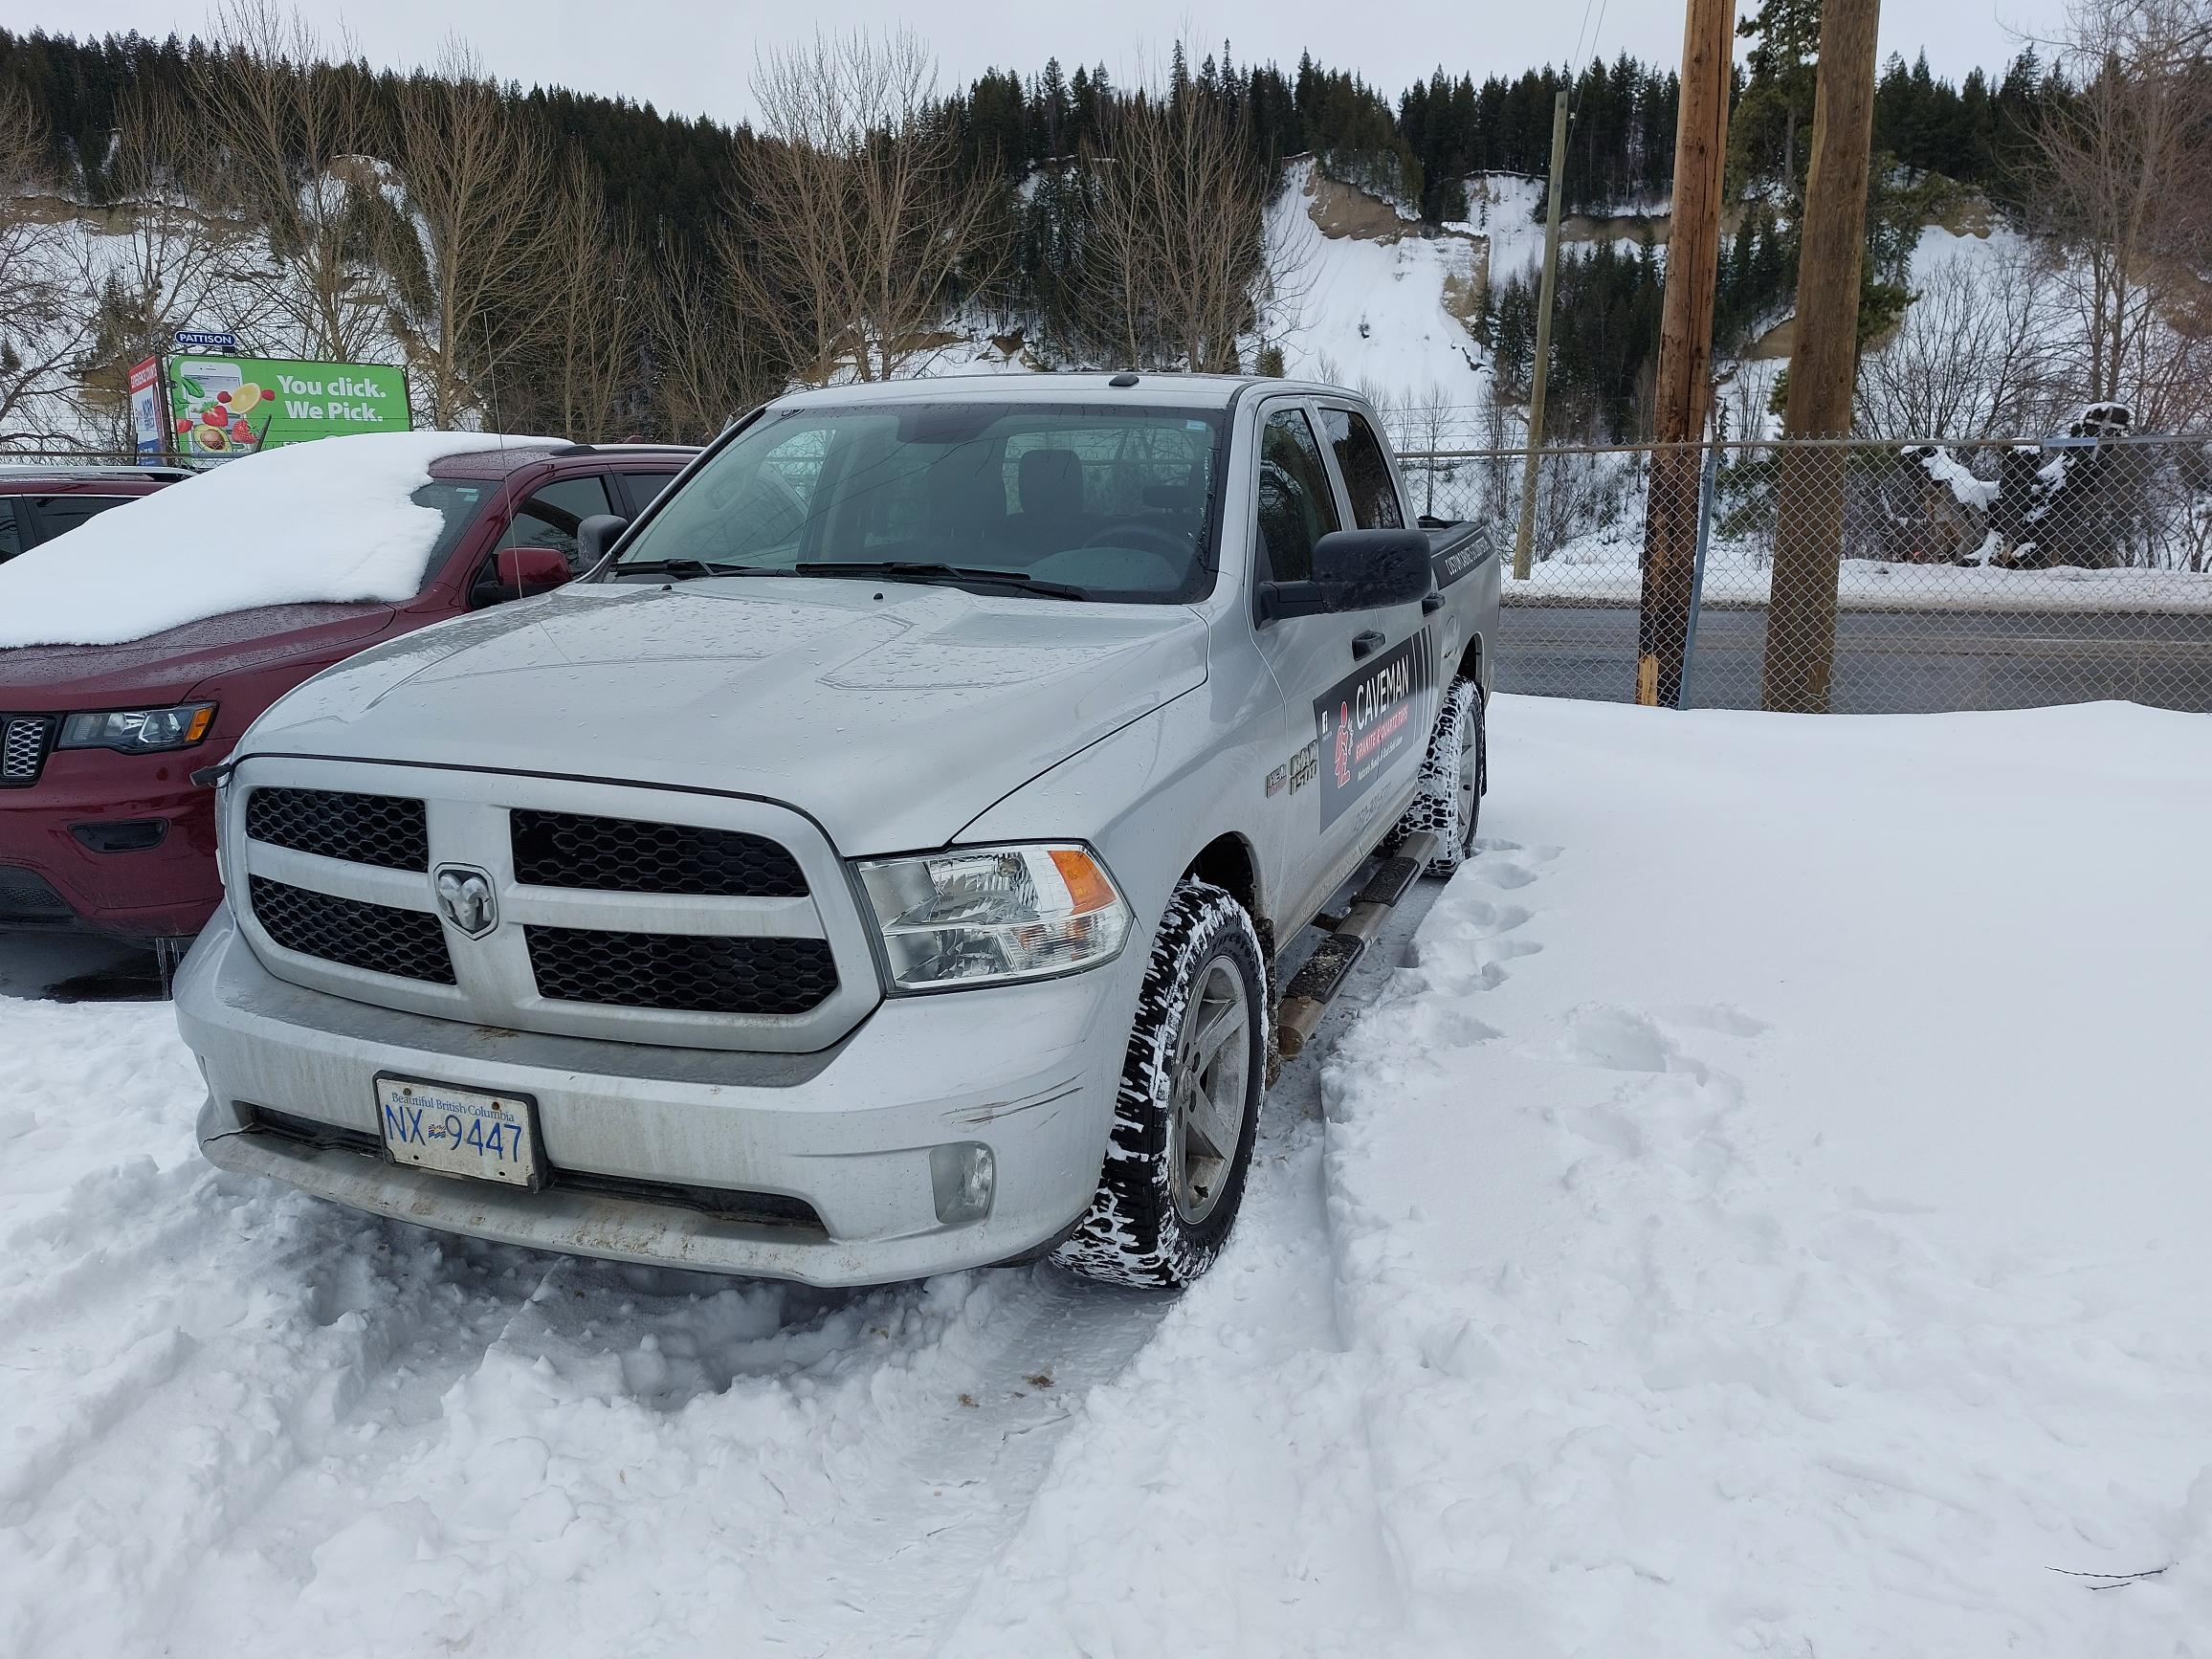 2018 Dodge Ram 1500 #B-PG-0748 Located in Prince George